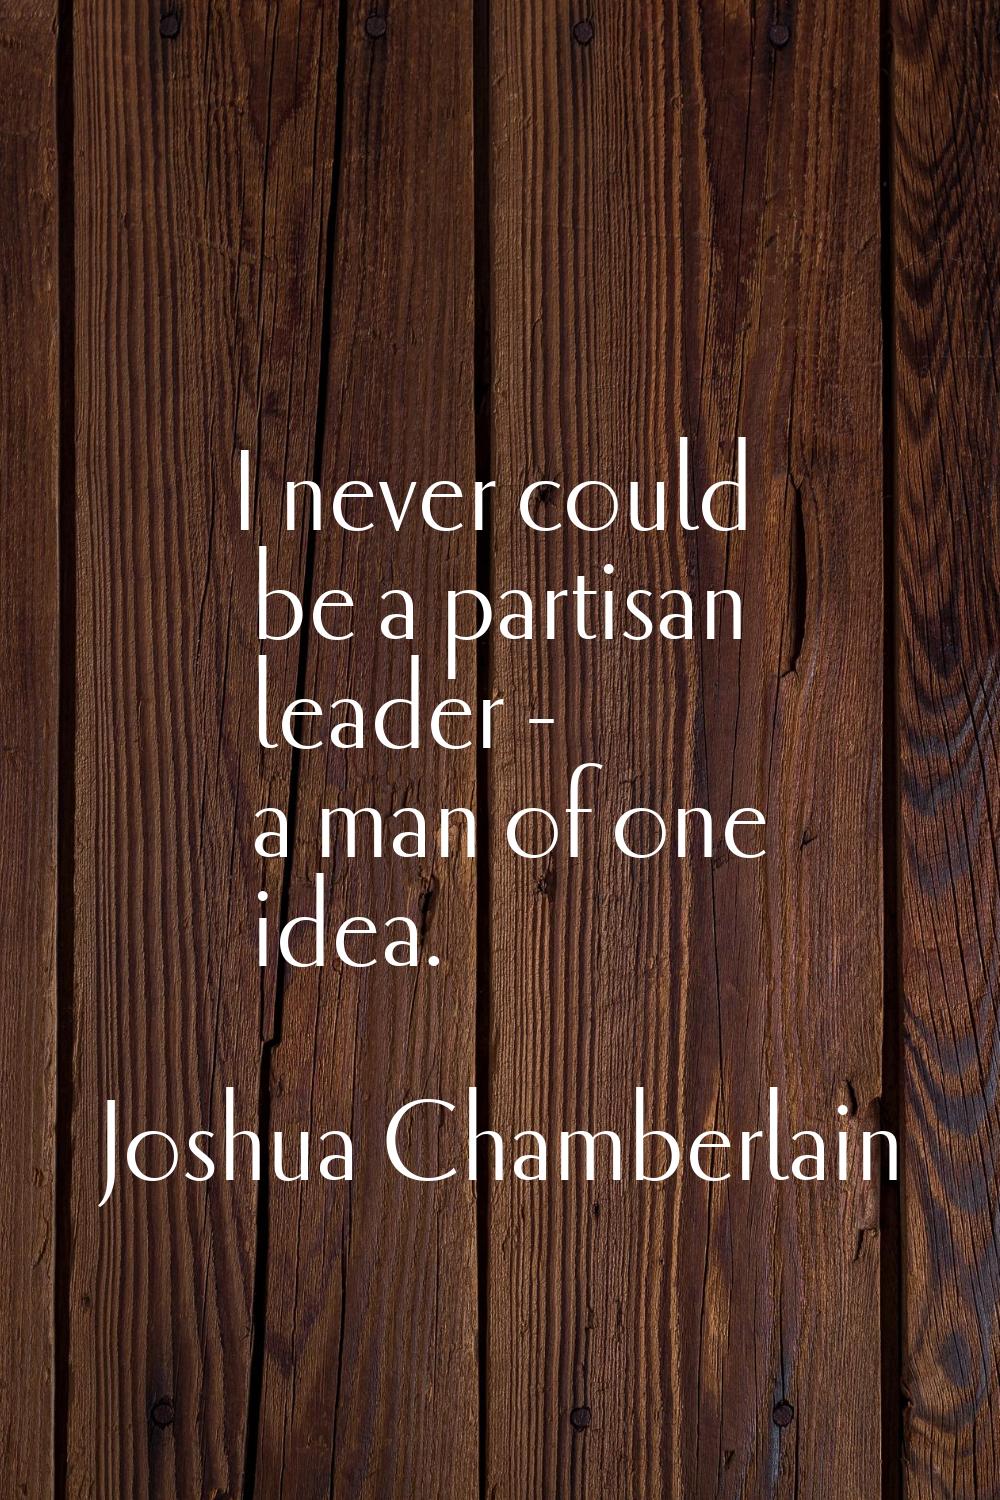 I never could be a partisan leader - a man of one idea.